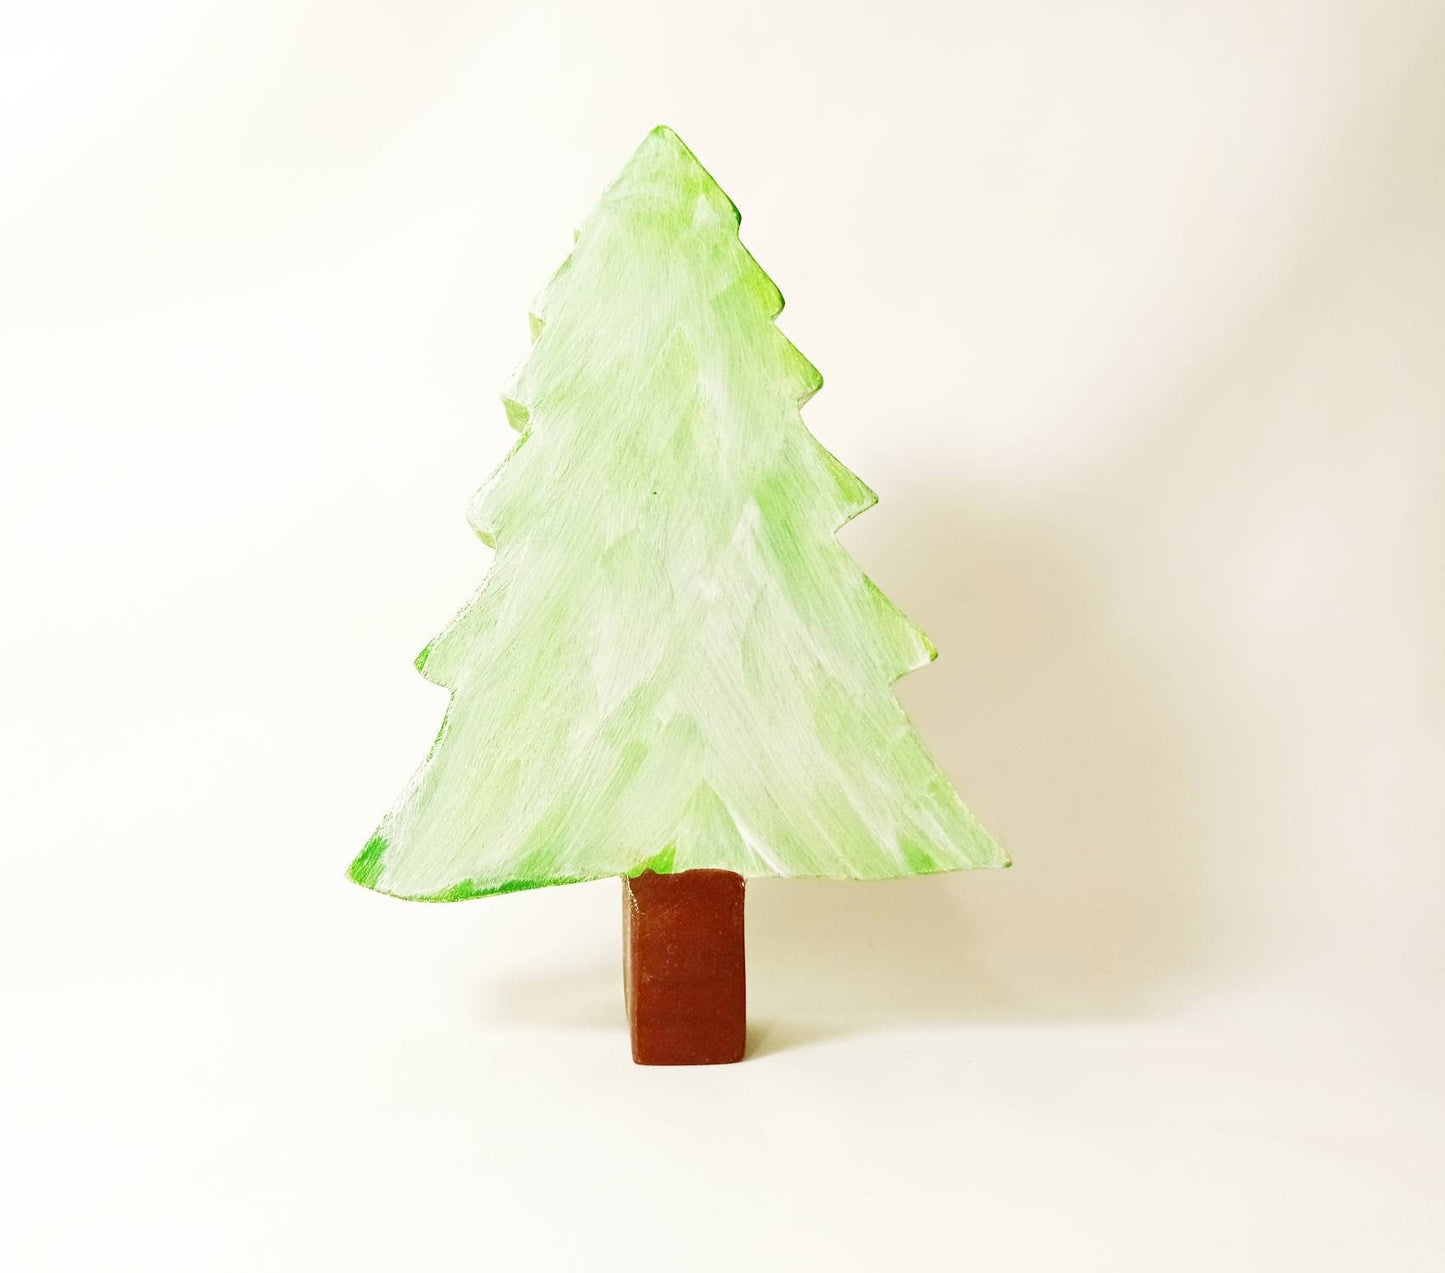 Snow fir tree wooden toy, wooden trees, play scene toy, play scape, waldorf wooden toys, gift for kids and toddlers, open ended play